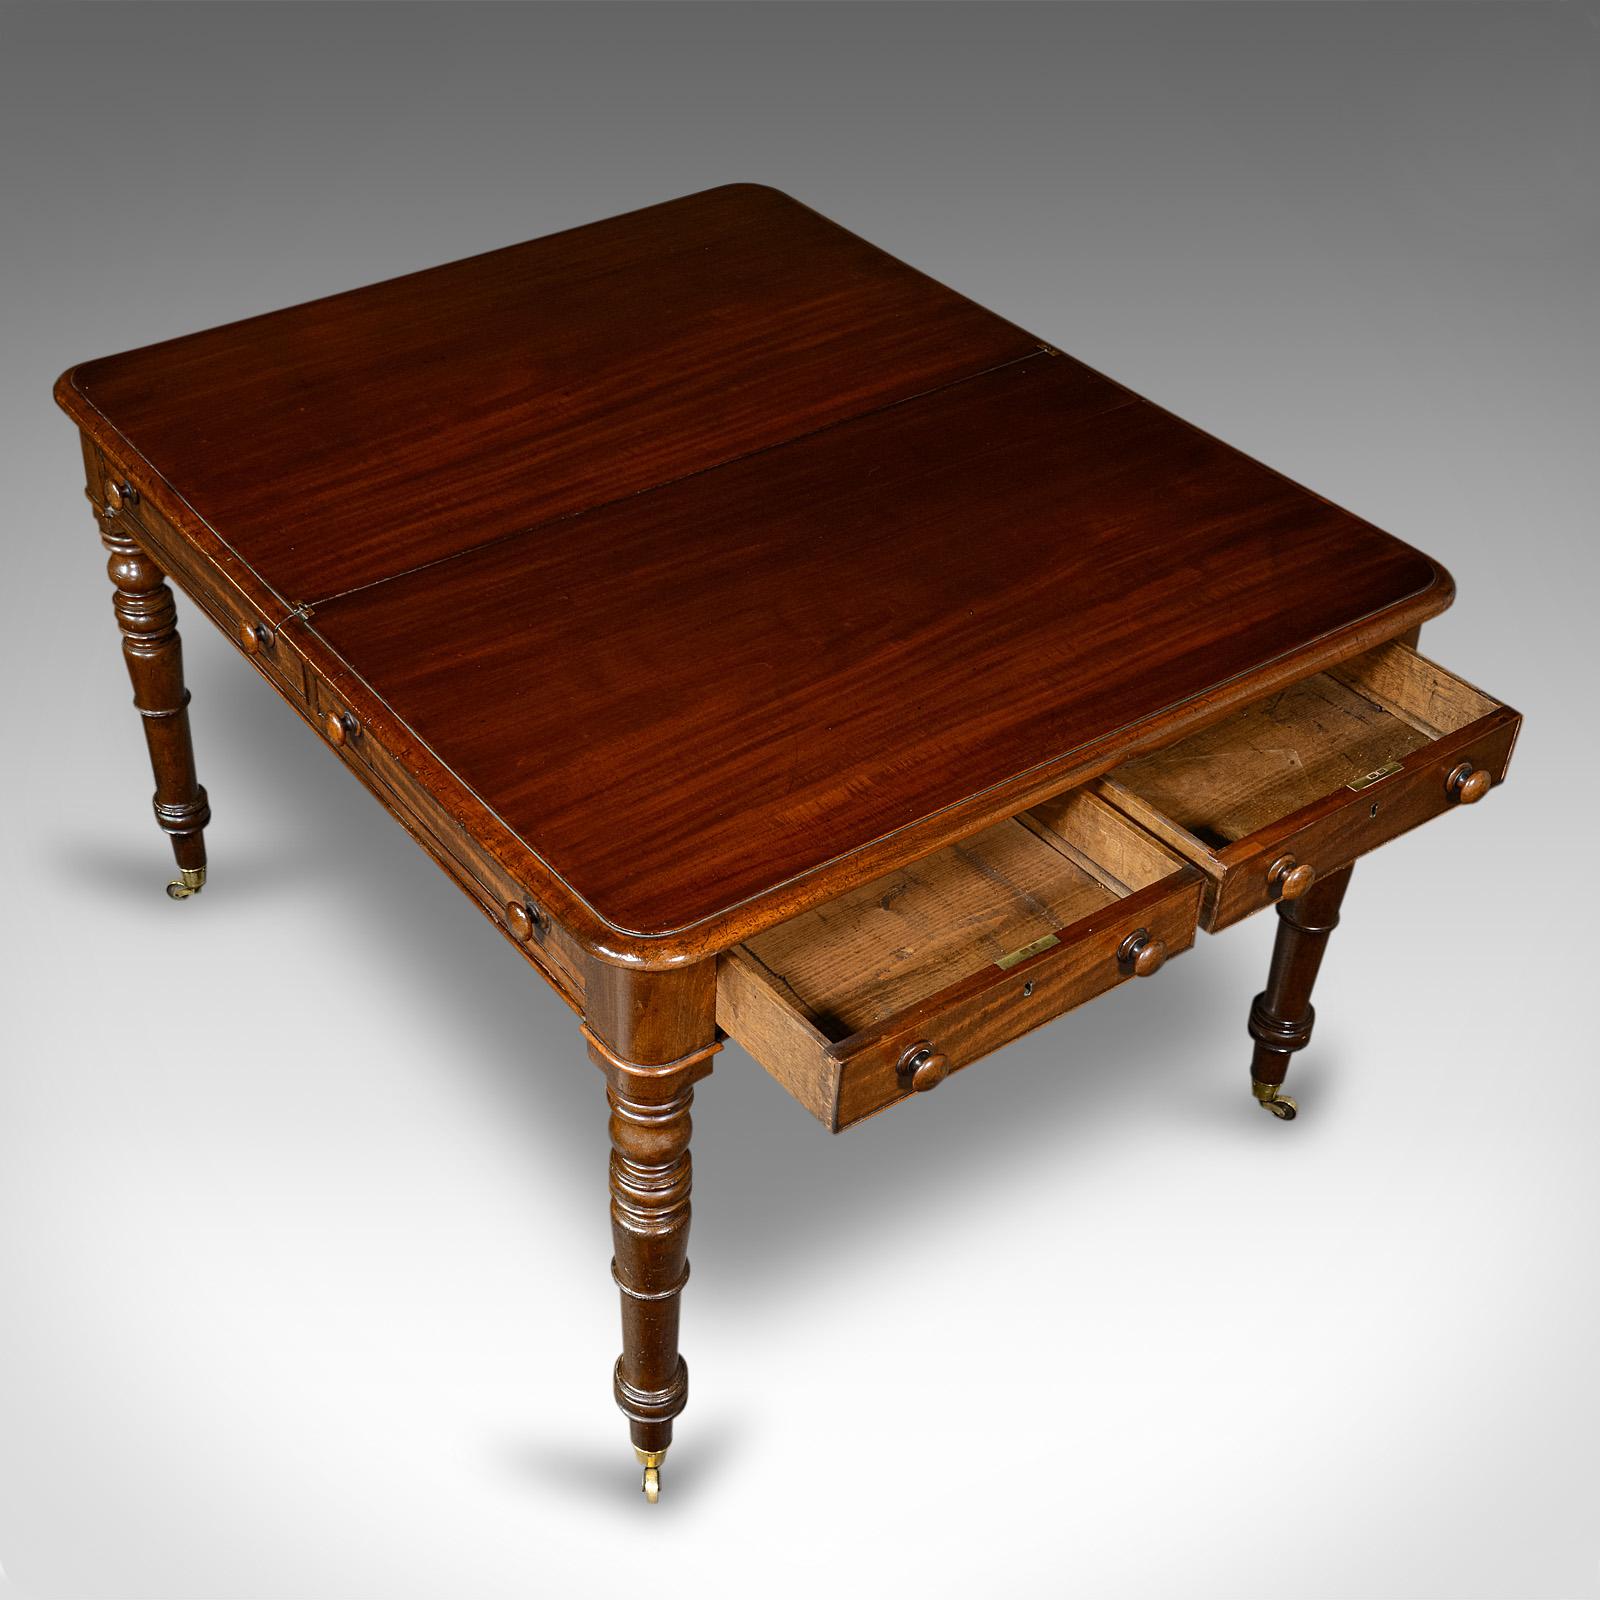 18th Century Antique Cartographer's Folio Table, English, Lift Over, Library, Desk, Georgian For Sale